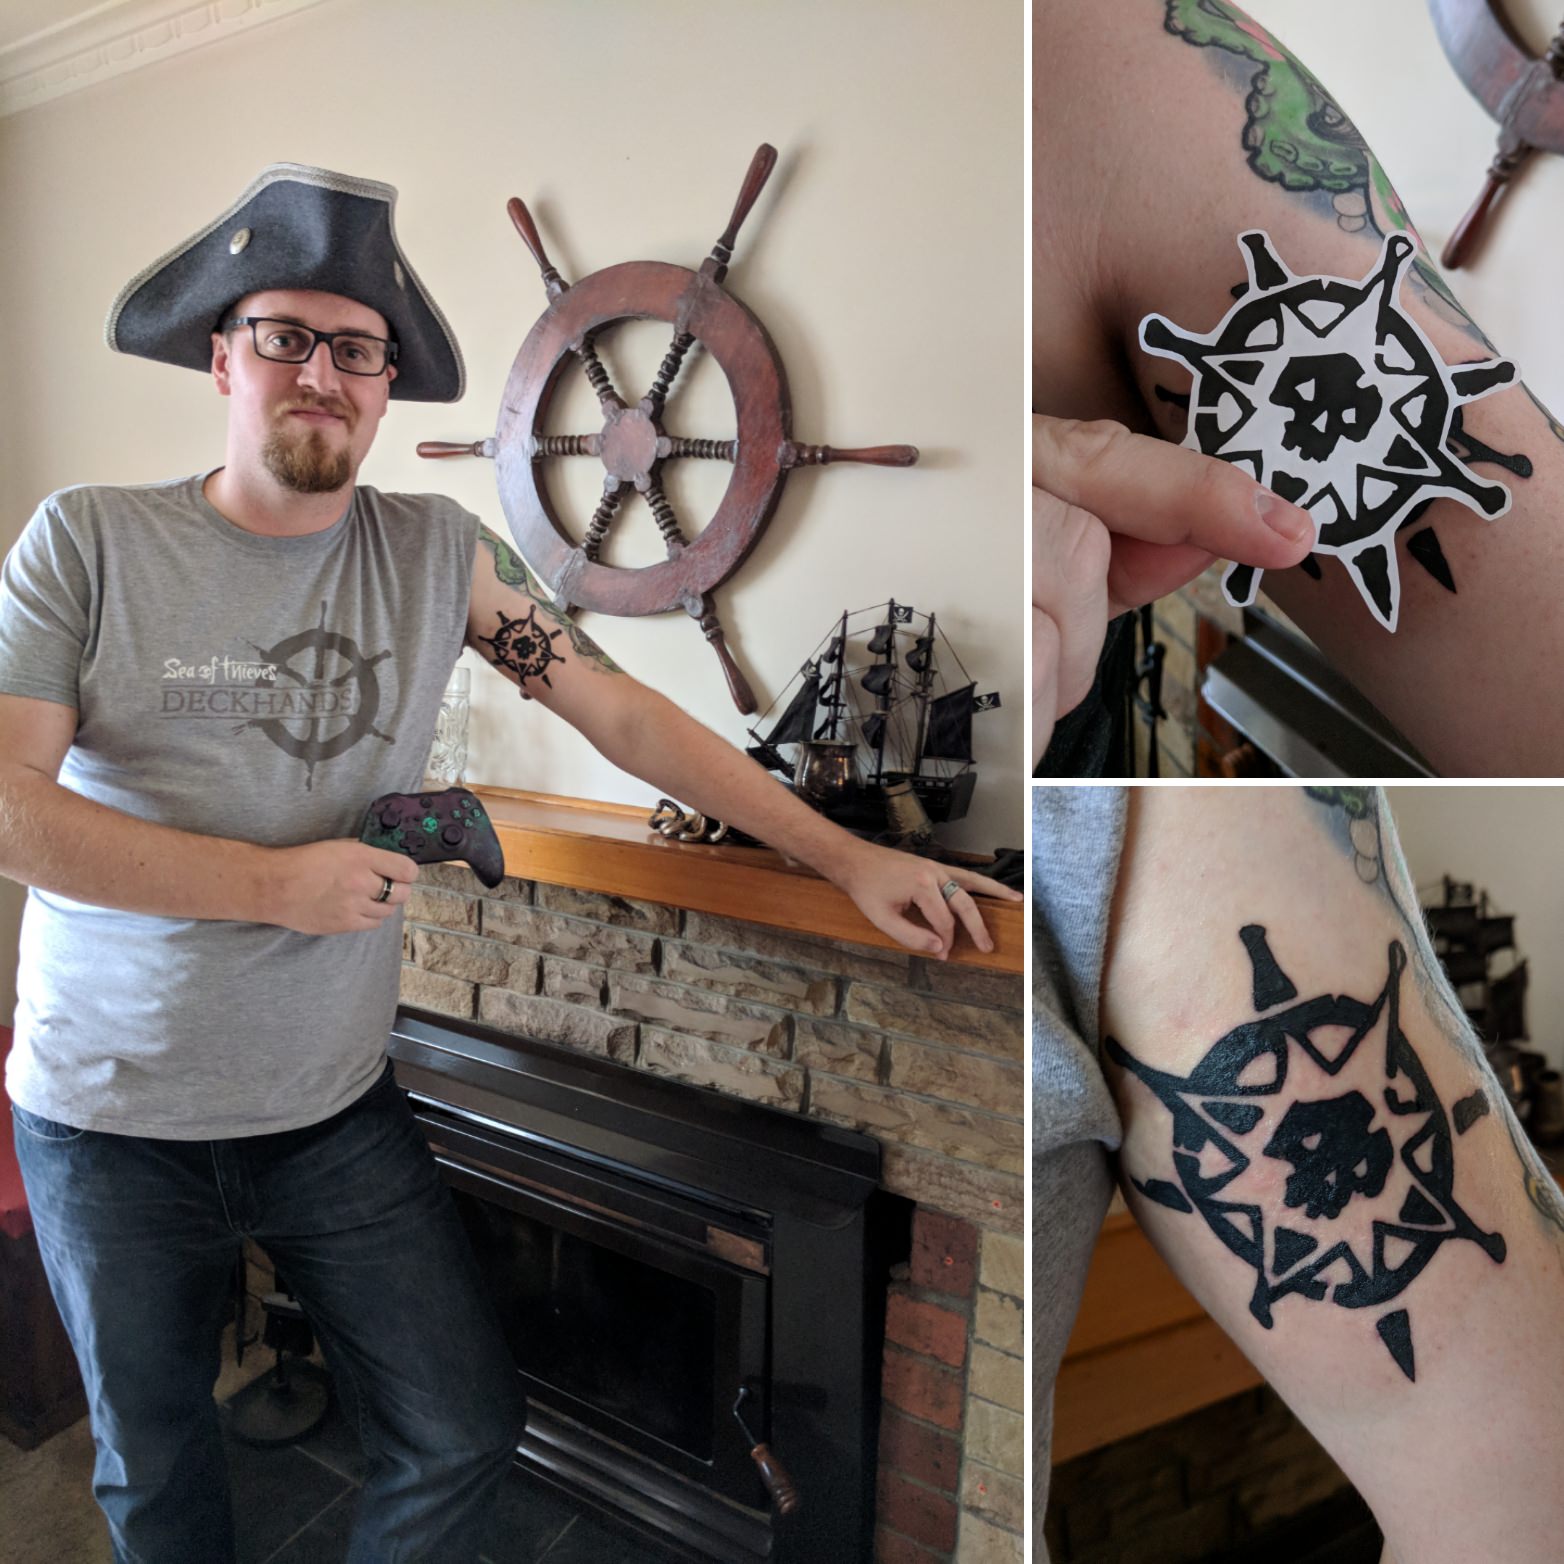 Sea of Thieves Tattoo Fit For A Deckhand. | Sea of Thieves Forum